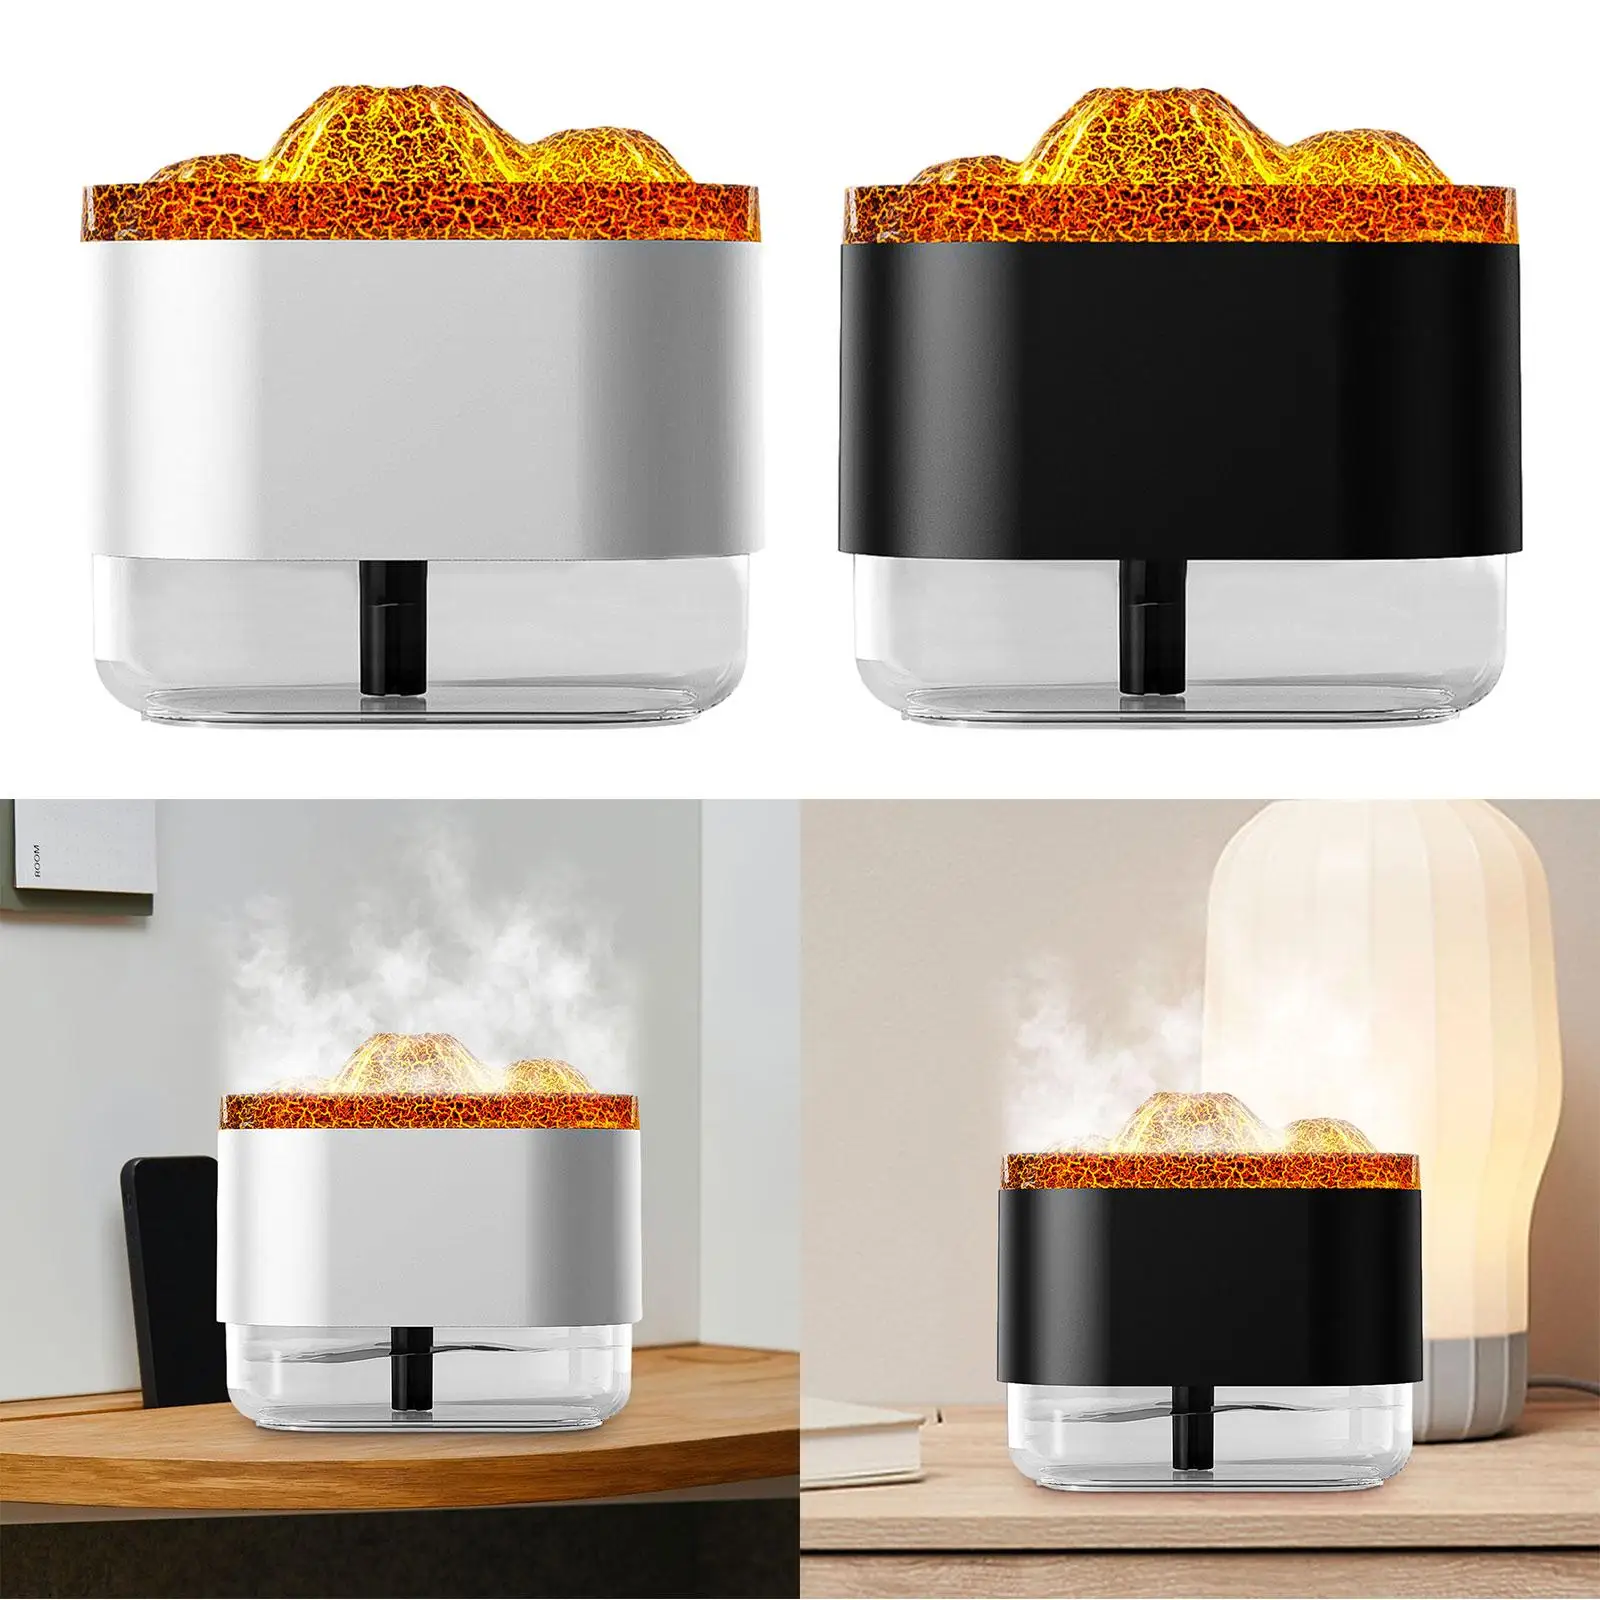 300ml USB Simulated Volcano Bedroom Humidifier Auto Shut Off Quiet with Colorful Light for Home Office Nursery Multifunctional